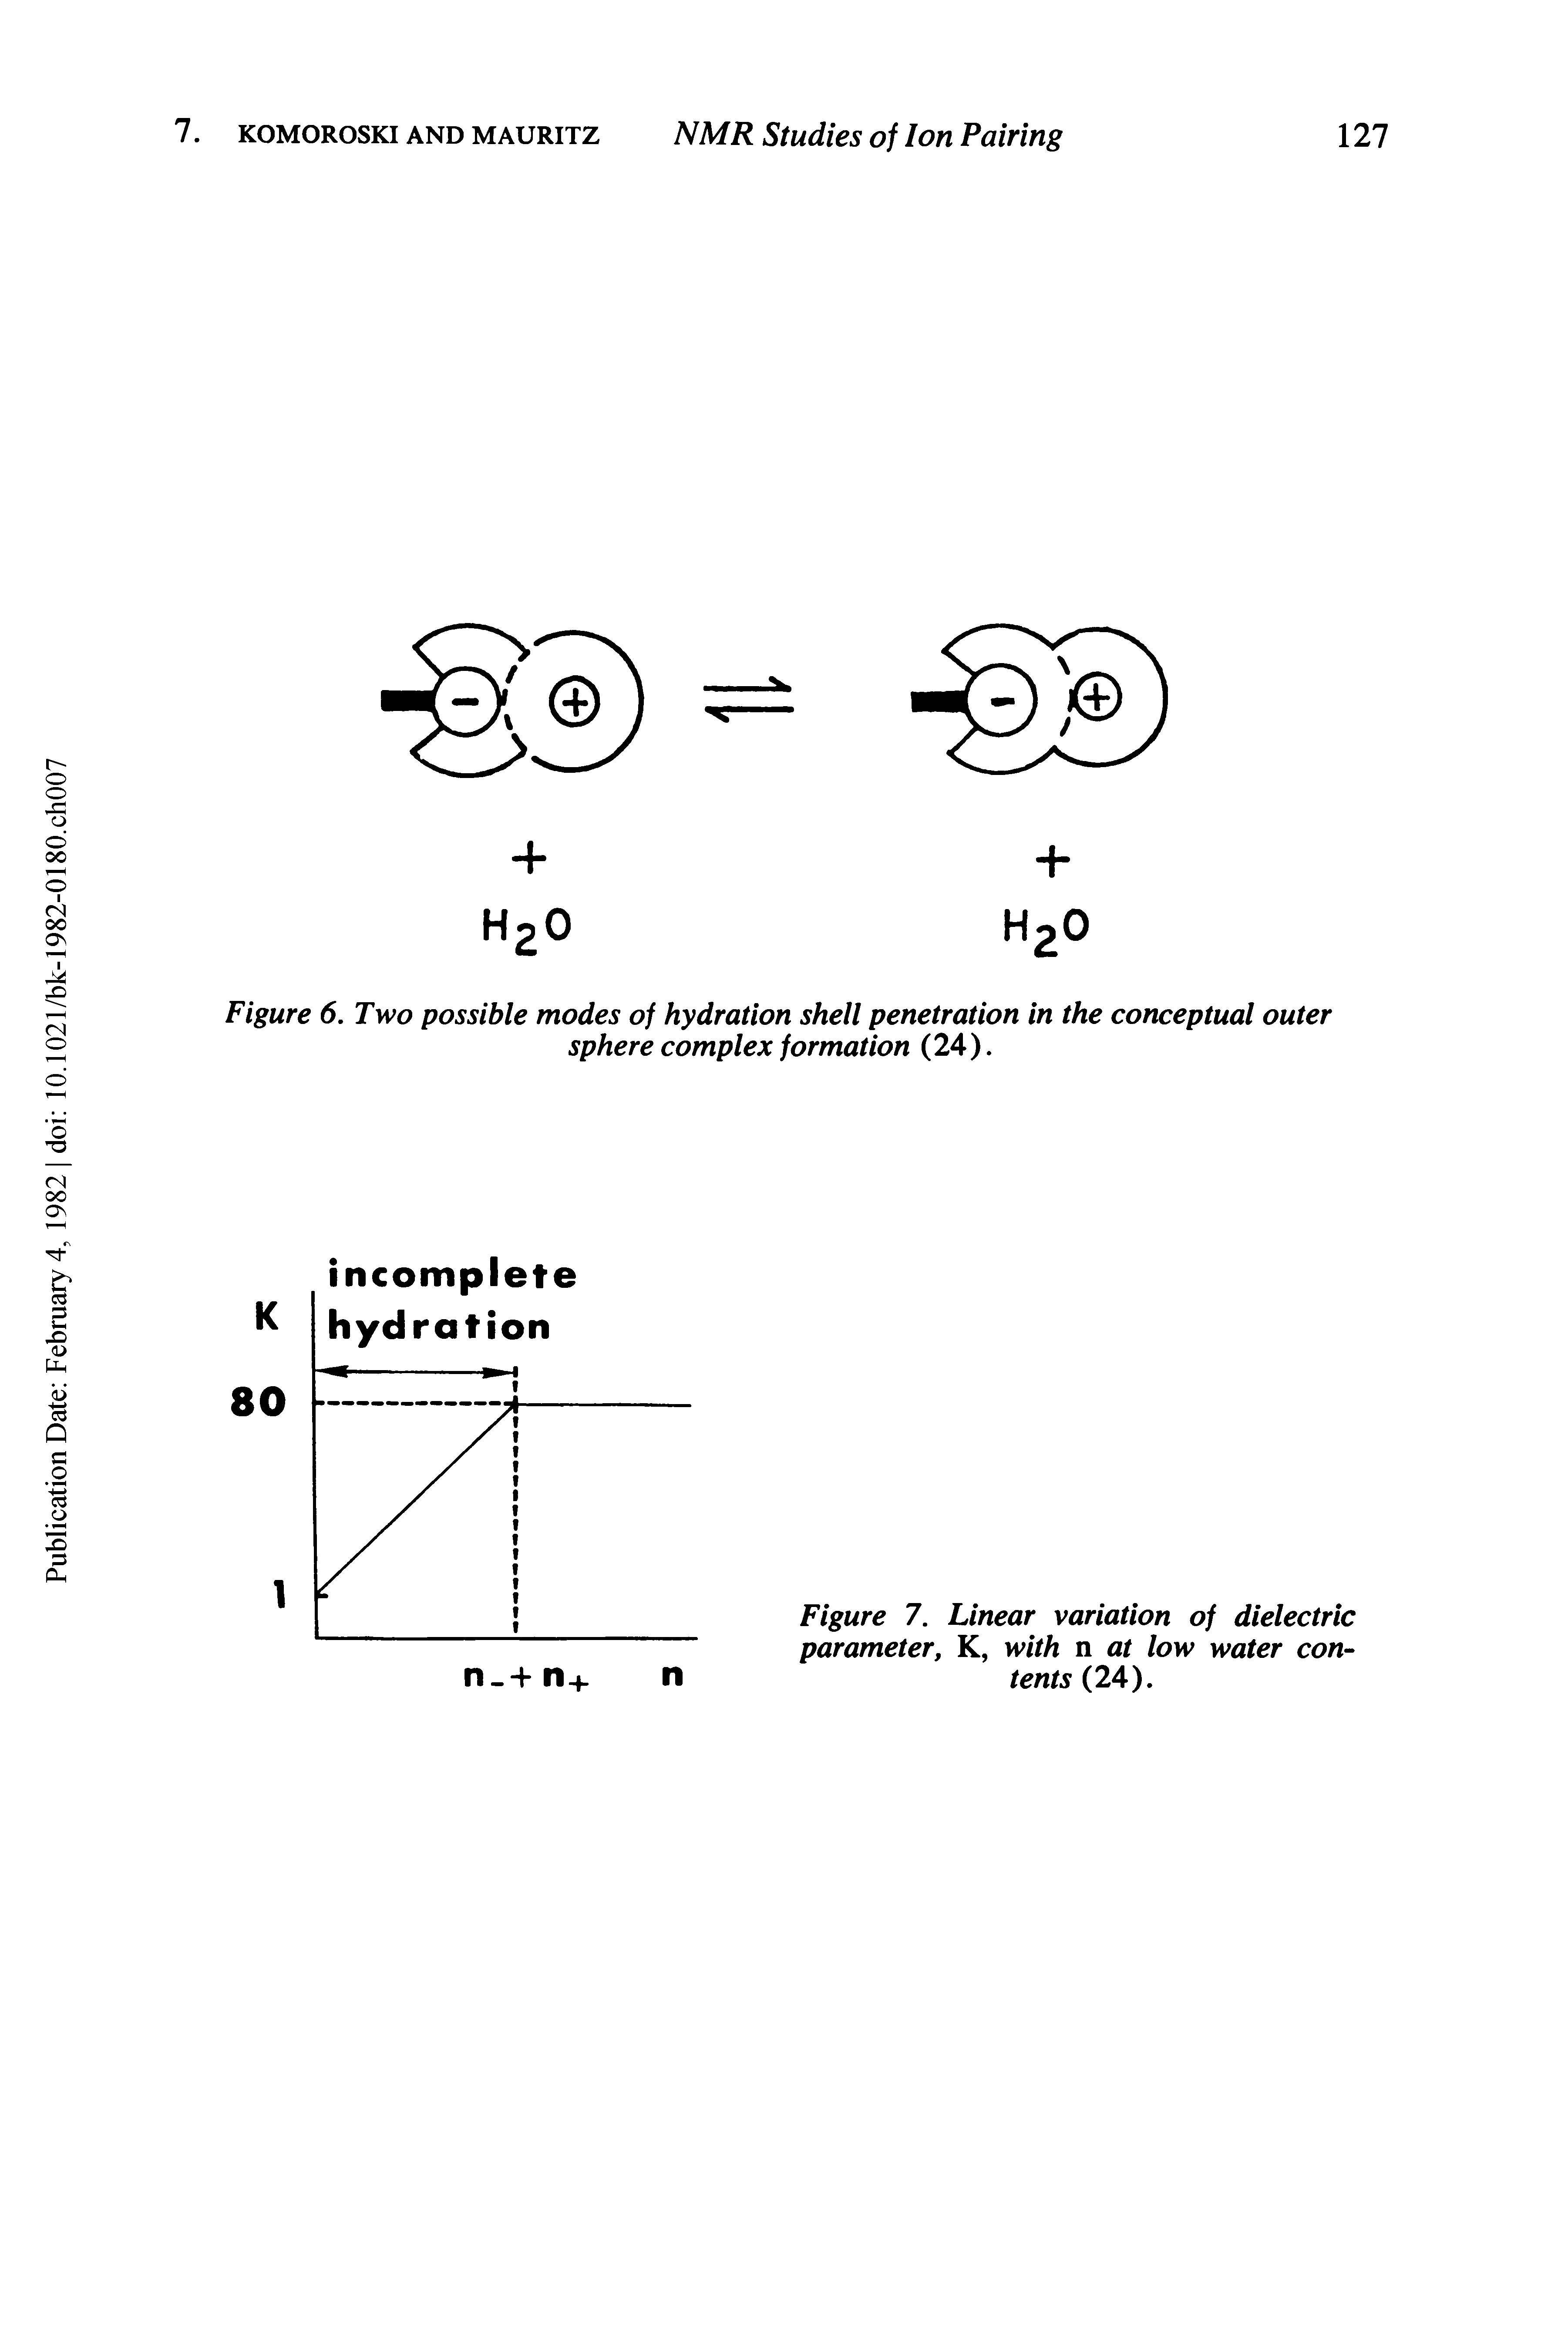 Figure 6. Two possible modes of hydration shell penetration in the conceptual outer sphere complex formation (24).